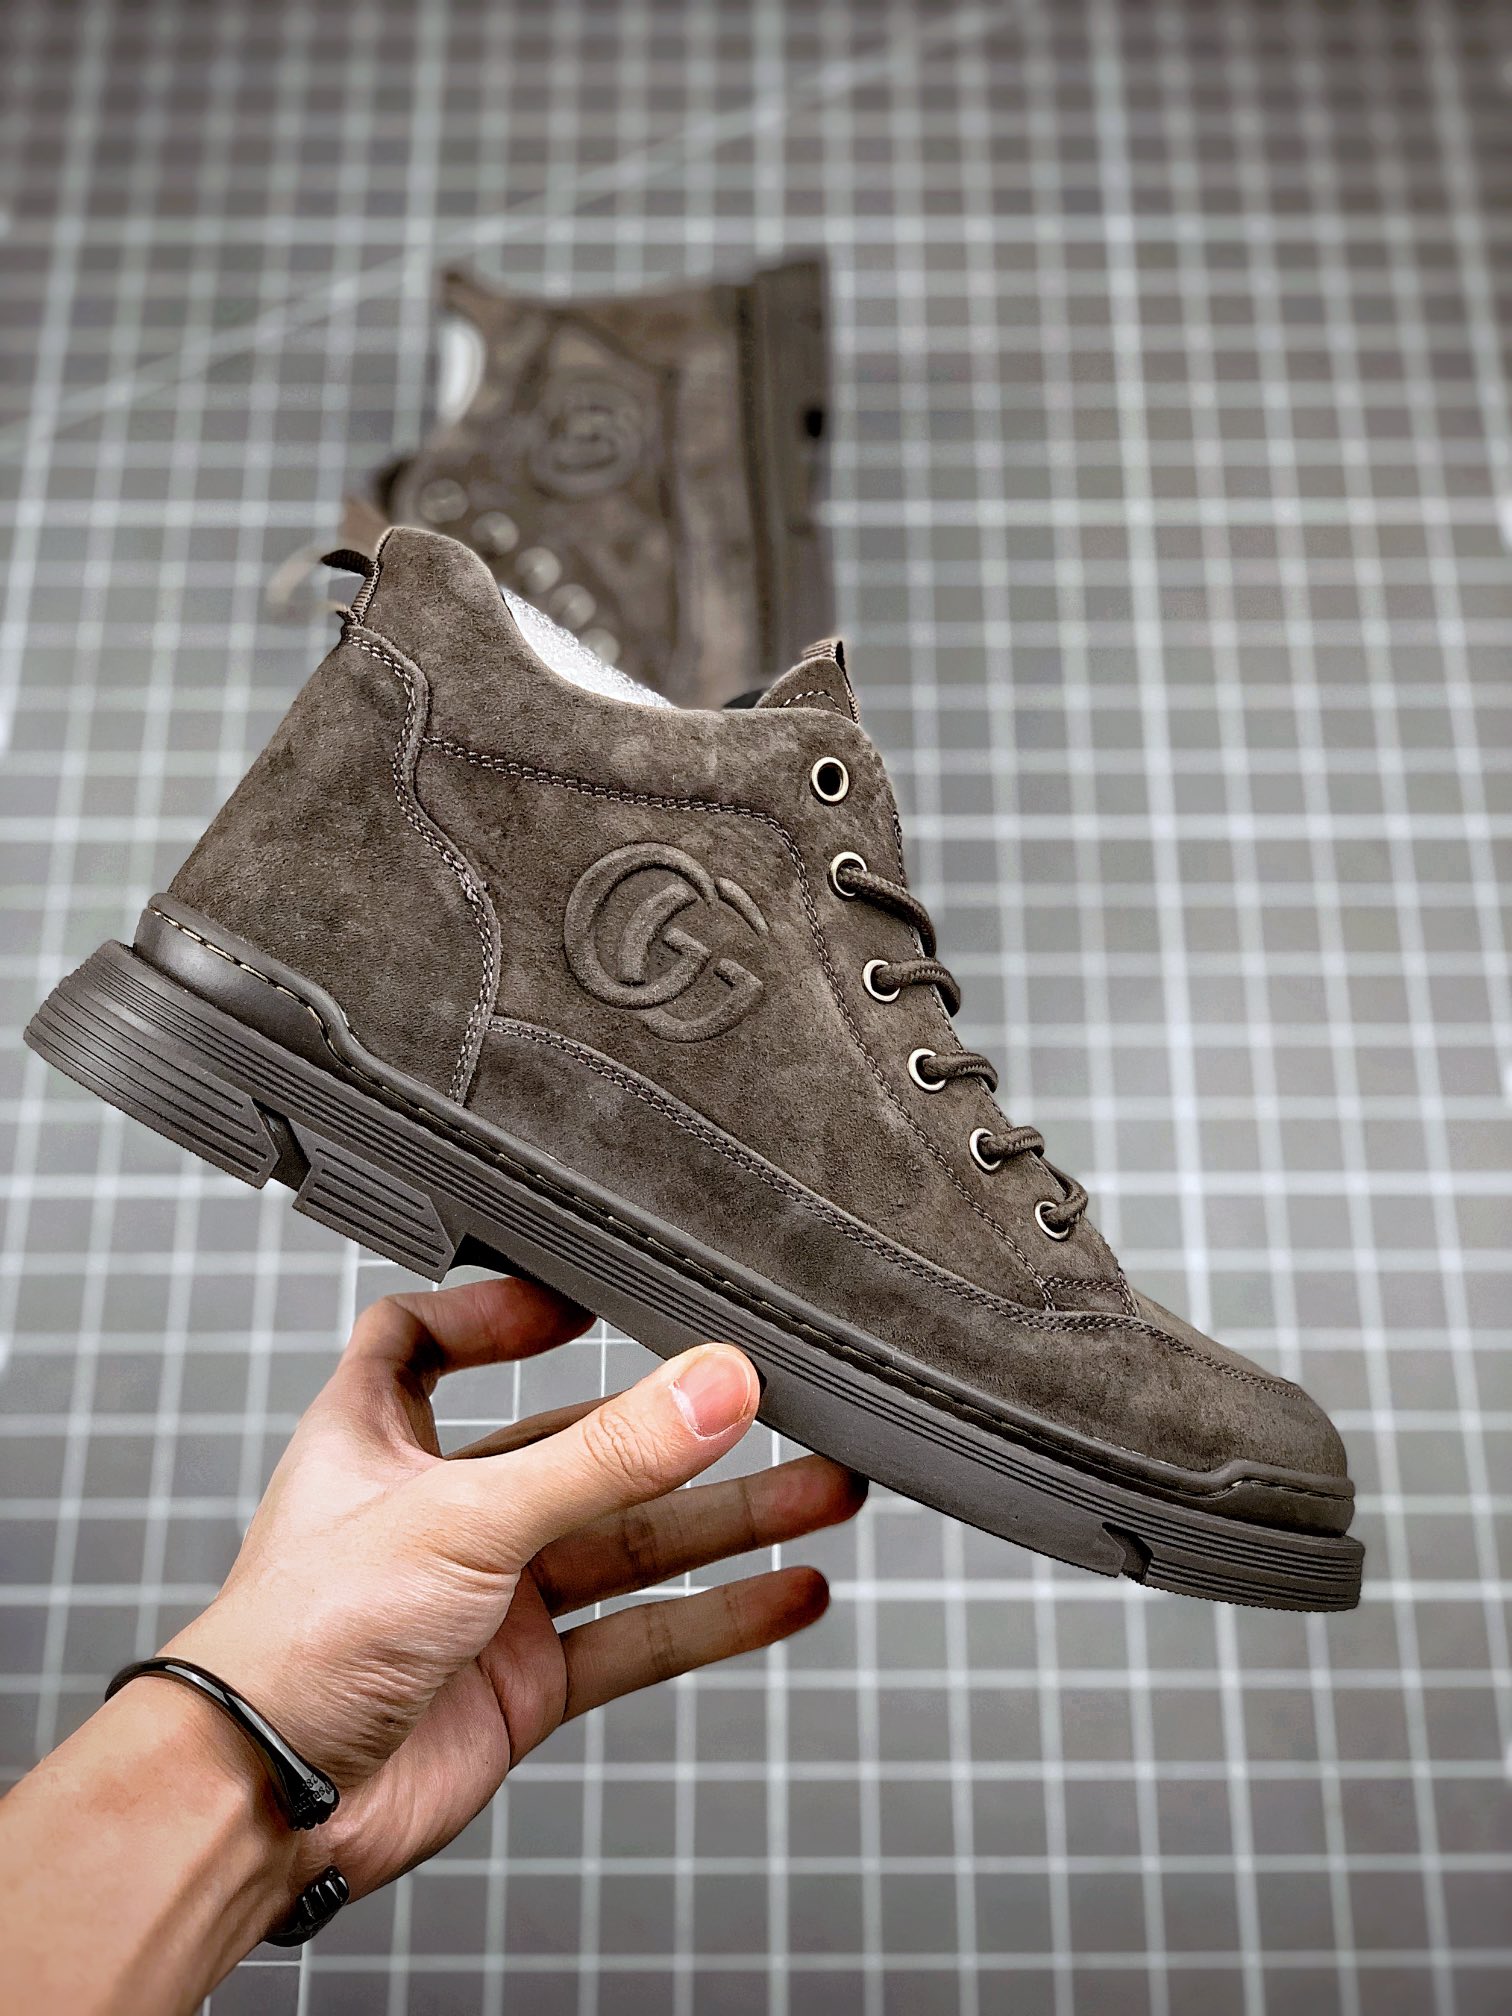 Gucci ankle boots and hiking shoes produced by Guangdong Dachang